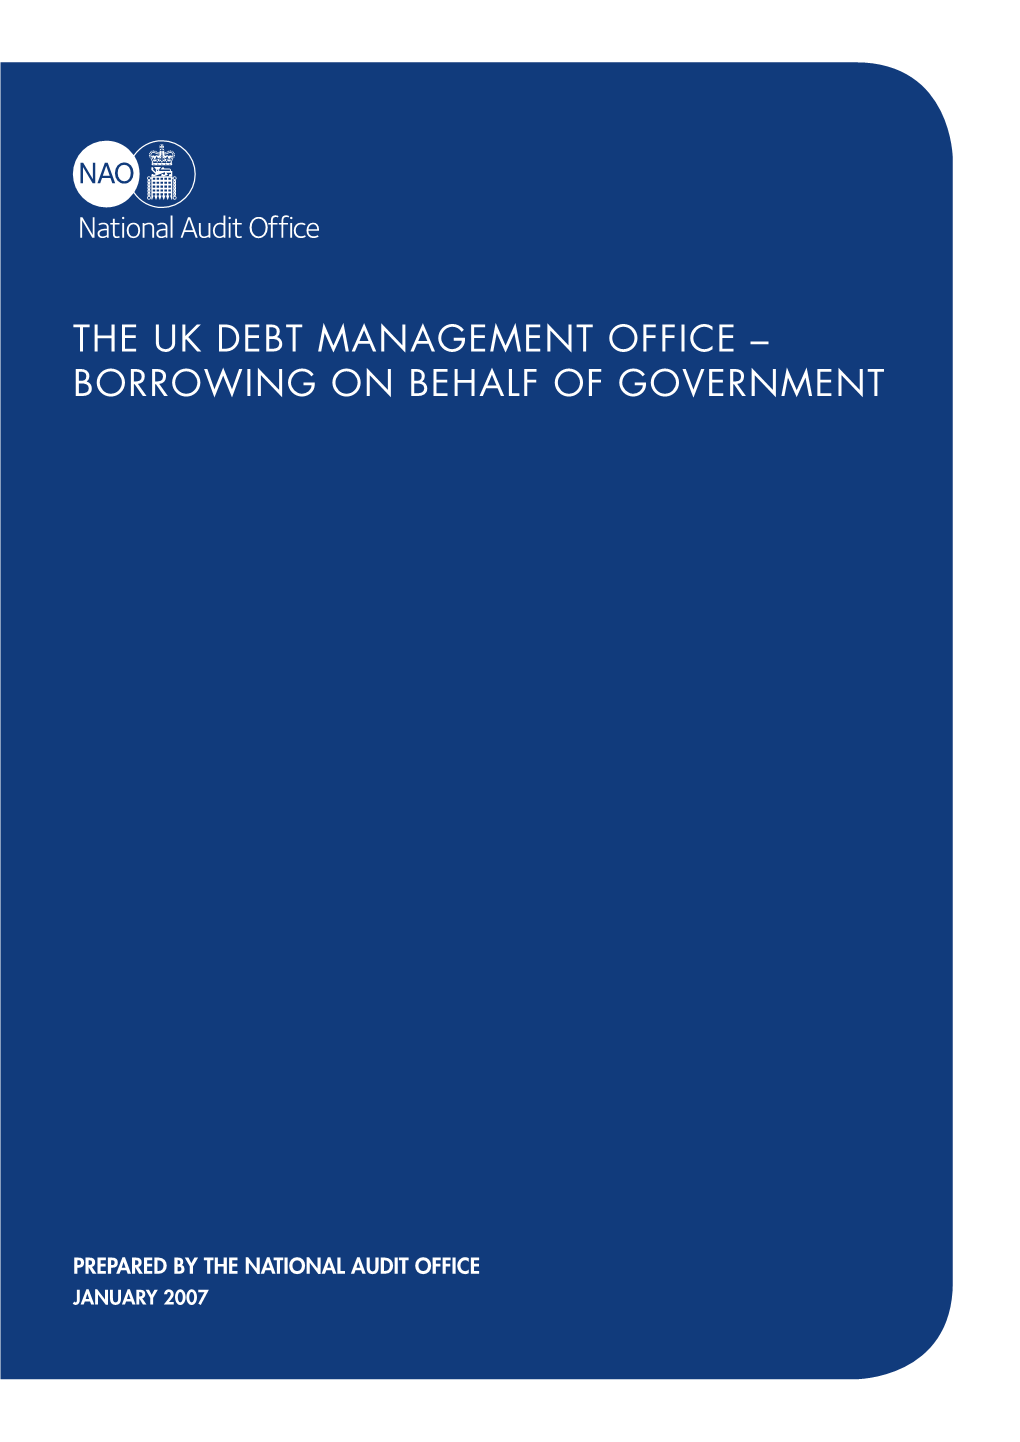 The Uk Debt Management Office – Borrowing on Behalf of Government